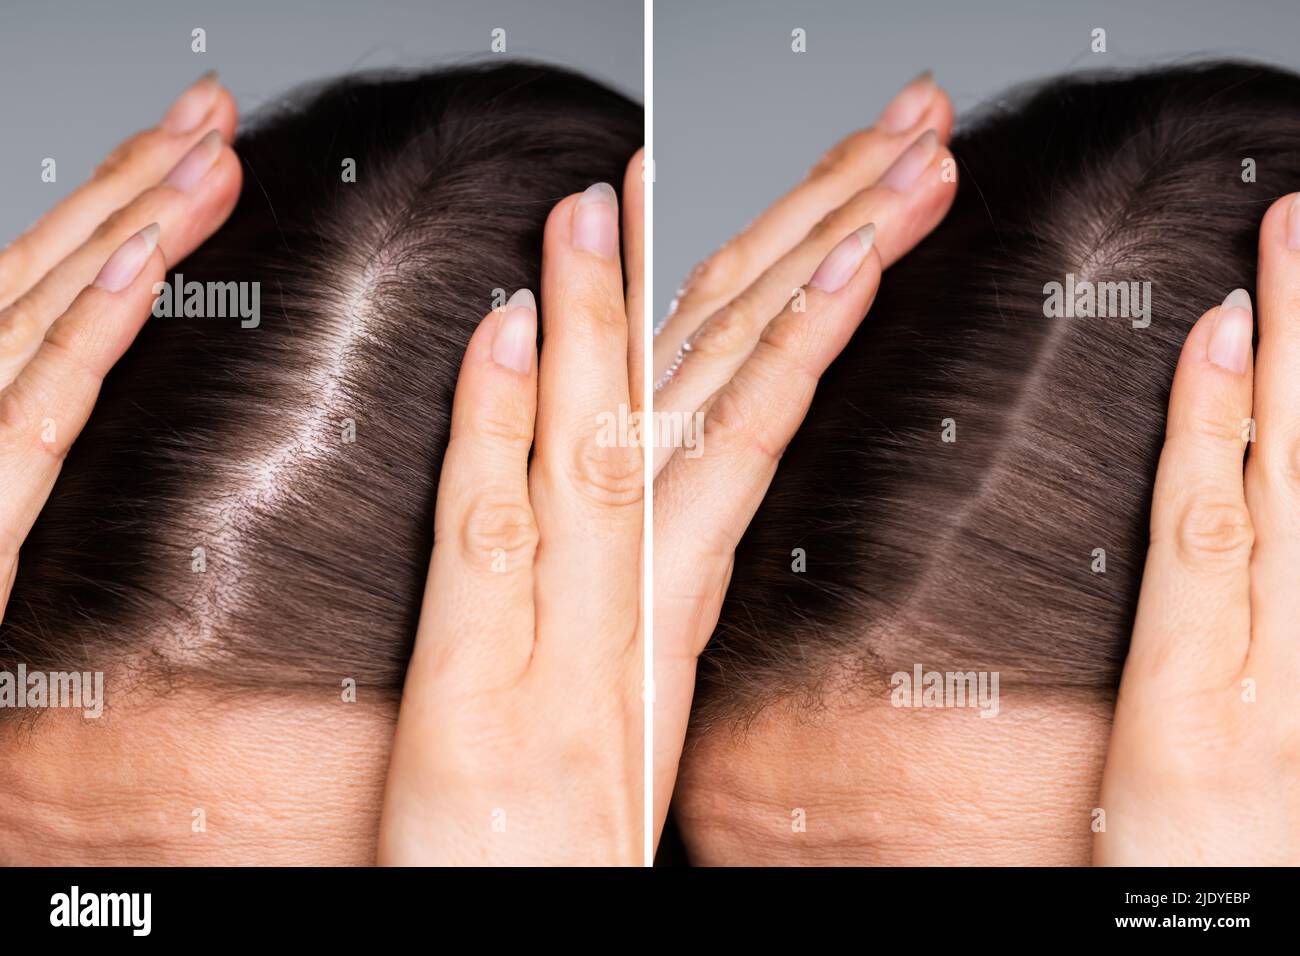 Woman Before And After Hair Loss Treatment Stock Photo